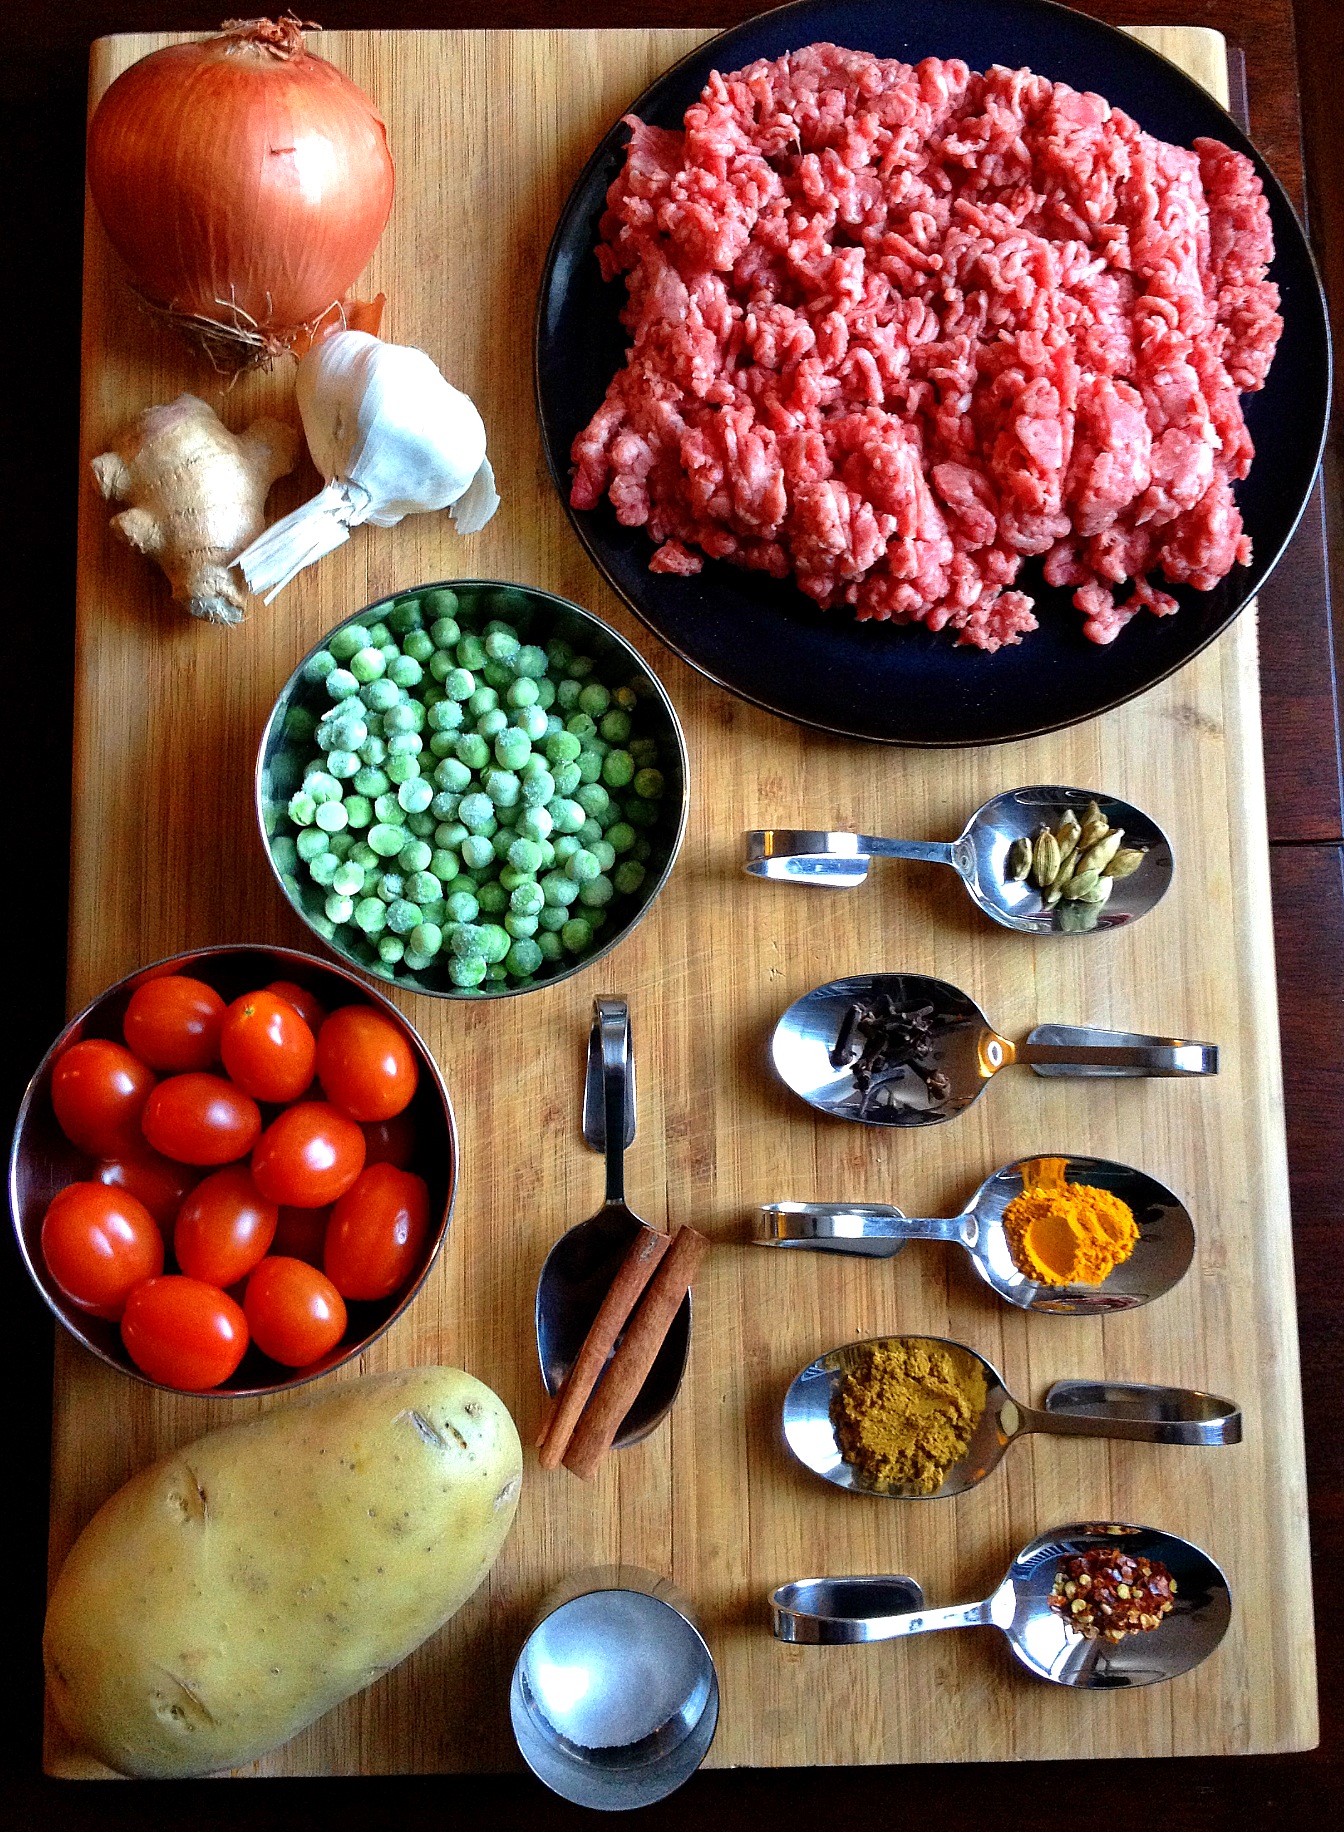 Ingredients for Lamb Keema with Potatoes and Sweet Green Peas